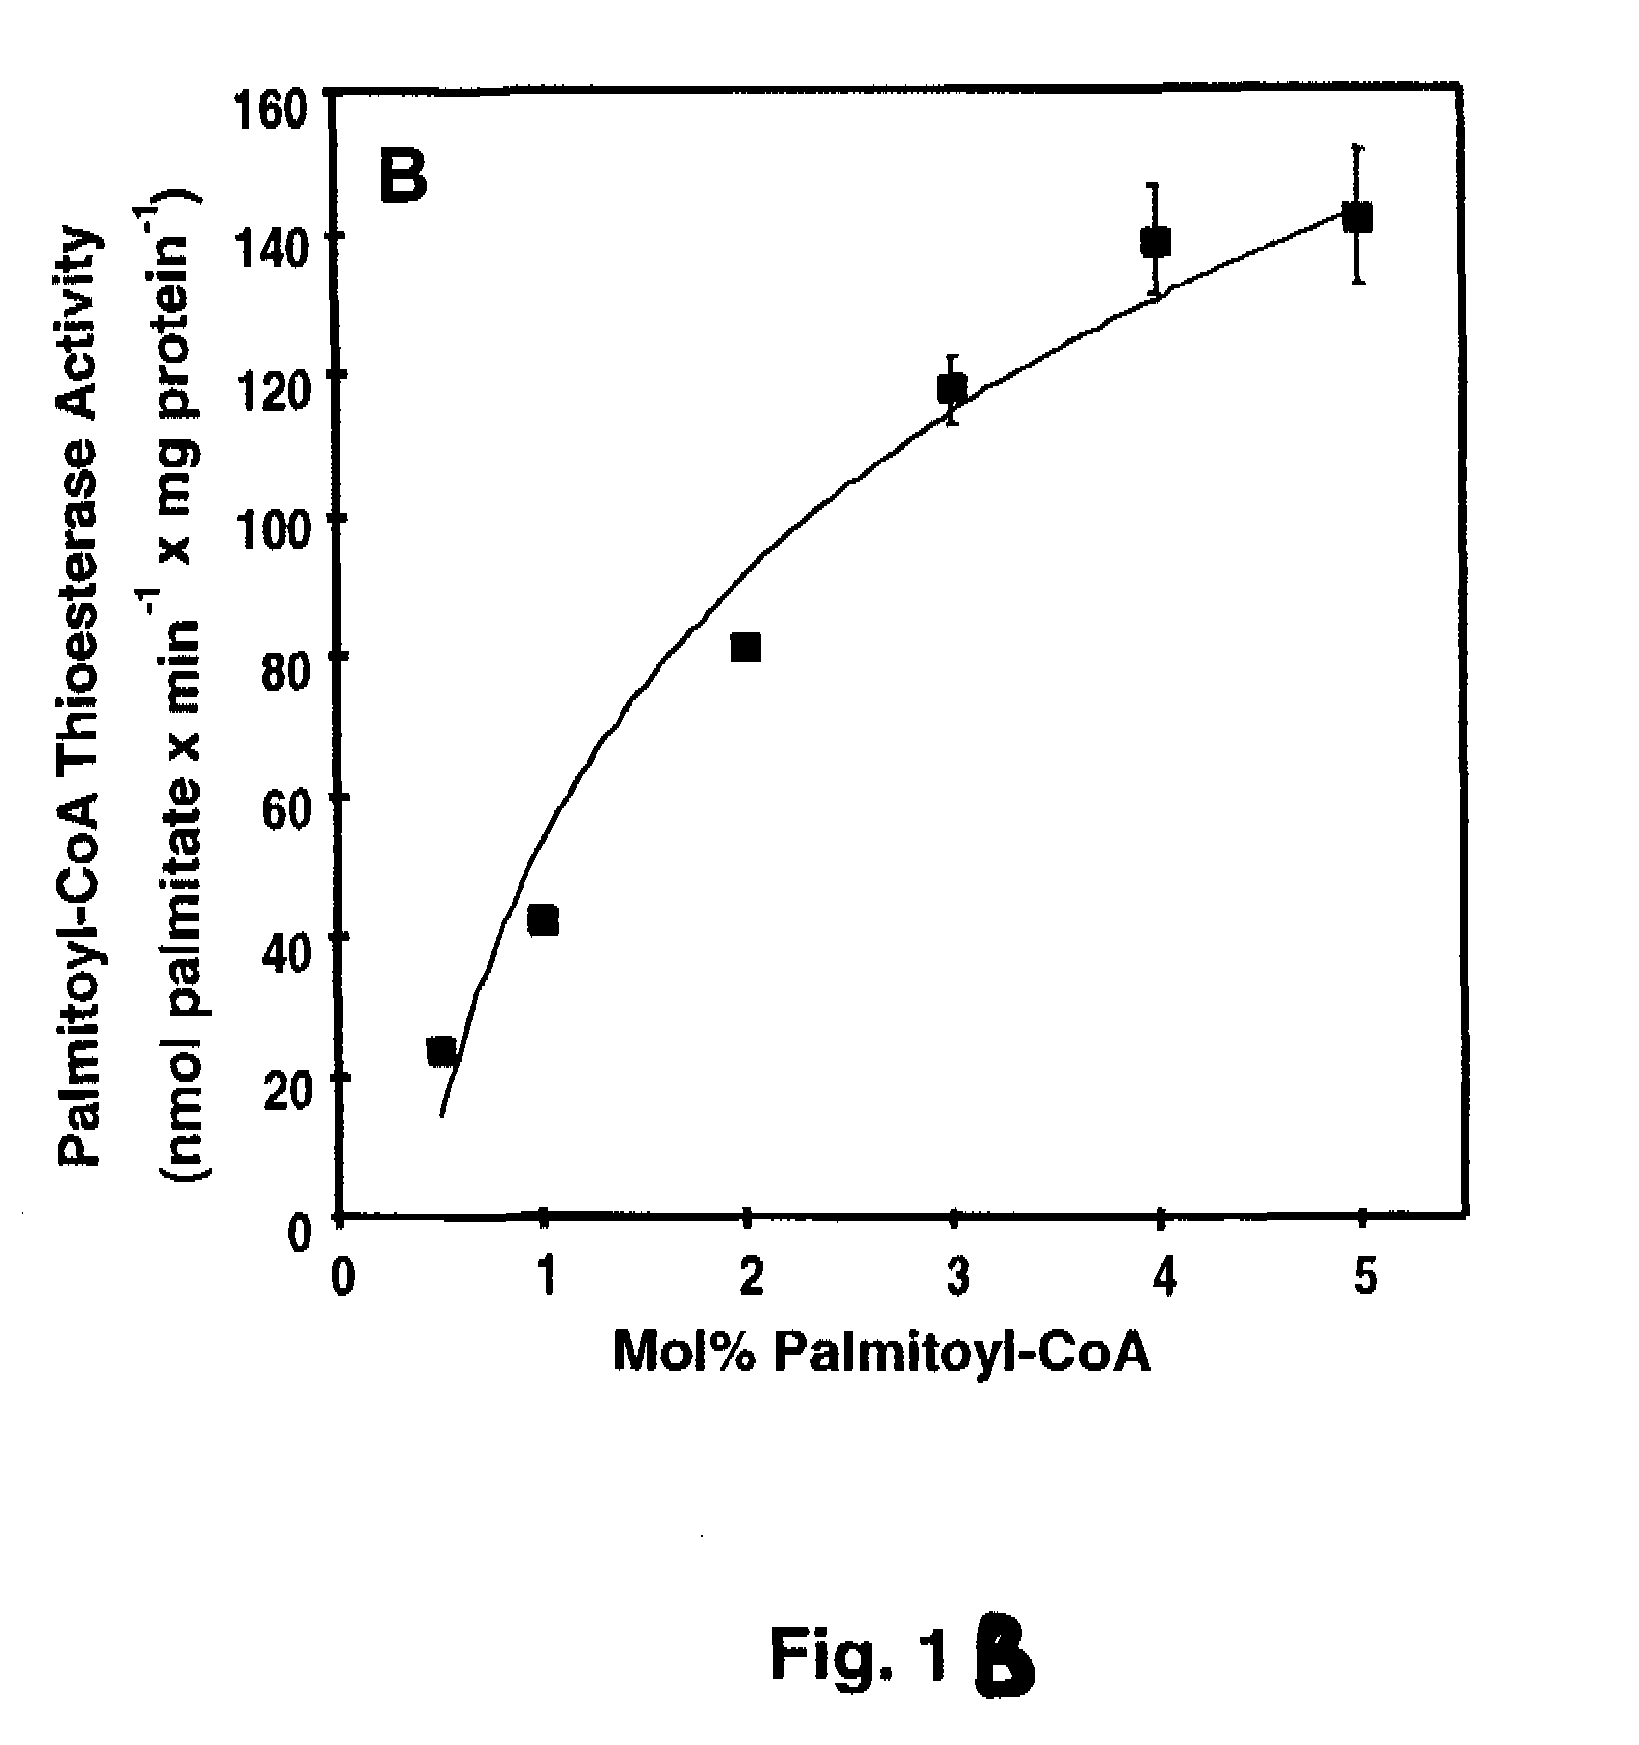 ENHANCED MEDICAL TREATMENTS RESULTING FROM CHEMICAL IDENTIFICATION OF CALCIUM INFLUX FACTOR, IDENTITY WITH THE FACTOR ACTIVATING PHOSPHOLIPOLYSIS AND PRECIPITATING SUDDEN DEATH DURING MYOCARDIAL INFARCTION, AND DETERMINATION OF SIMILAR ACTIVATING MECHANISMS IN MULTIPLE CELL TYPES THROUGH DISINHIBITION OF CALCIUM-INDEPENDENT PHOSPHOLIPASE A2beta